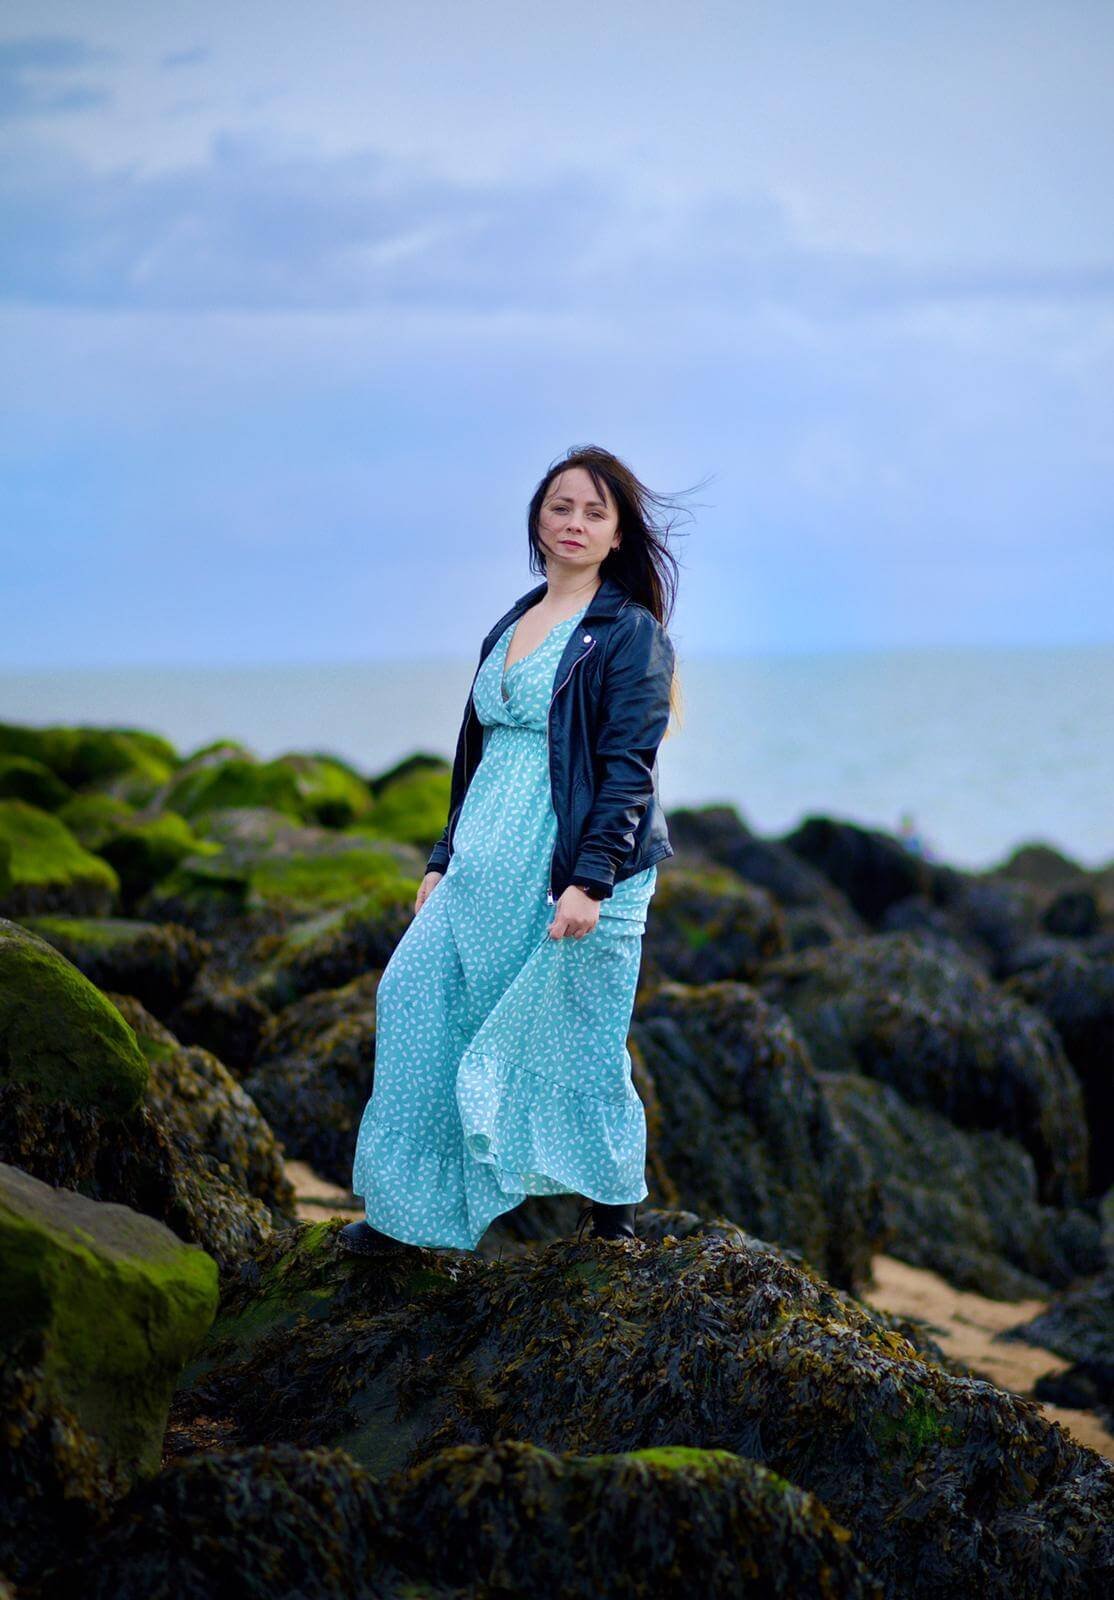 Woman in Teal Patterned Dress and Black Leather Jacket by the Sea